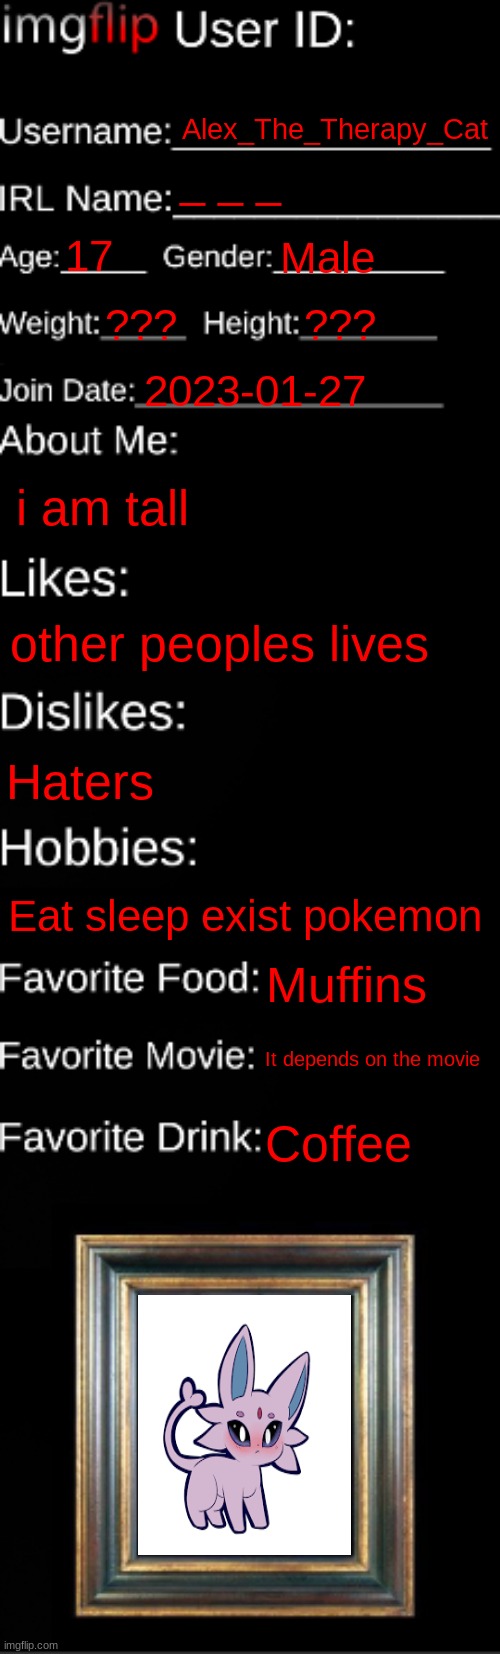 E | Alex_The_Therapy_Cat; _ _ _; 17; Male; ??? ??? 2023-01-27; i am tall; other peoples lives; Haters; Eat sleep exist pokemon; Muffins; It depends on the movie; Coffee | image tagged in imgflip id card | made w/ Imgflip meme maker